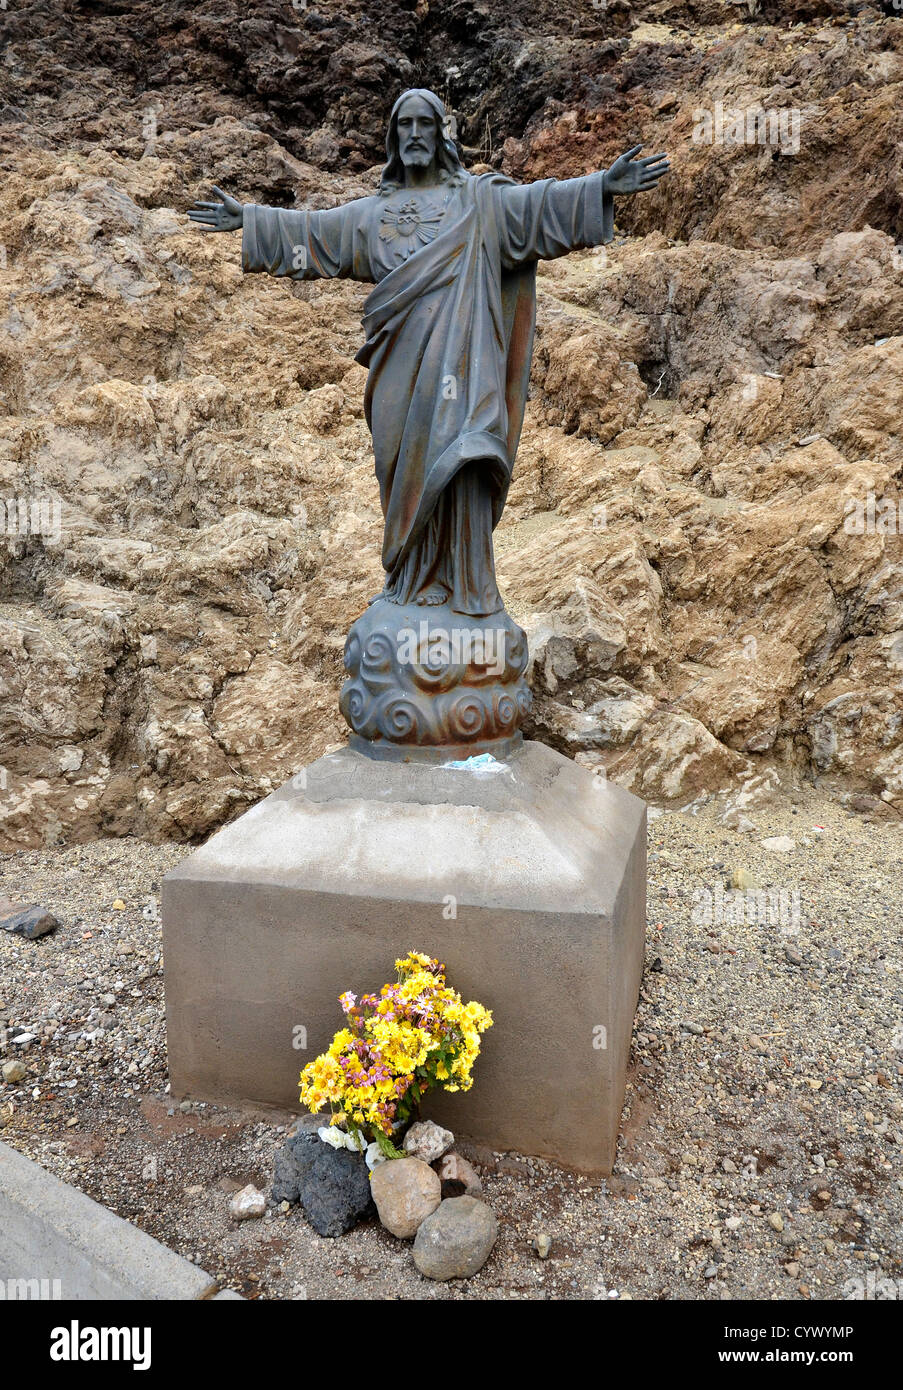 A statue of Jesus Christ near the summit of Mount Teide, Tenerife, Canary Islands Stock Photo